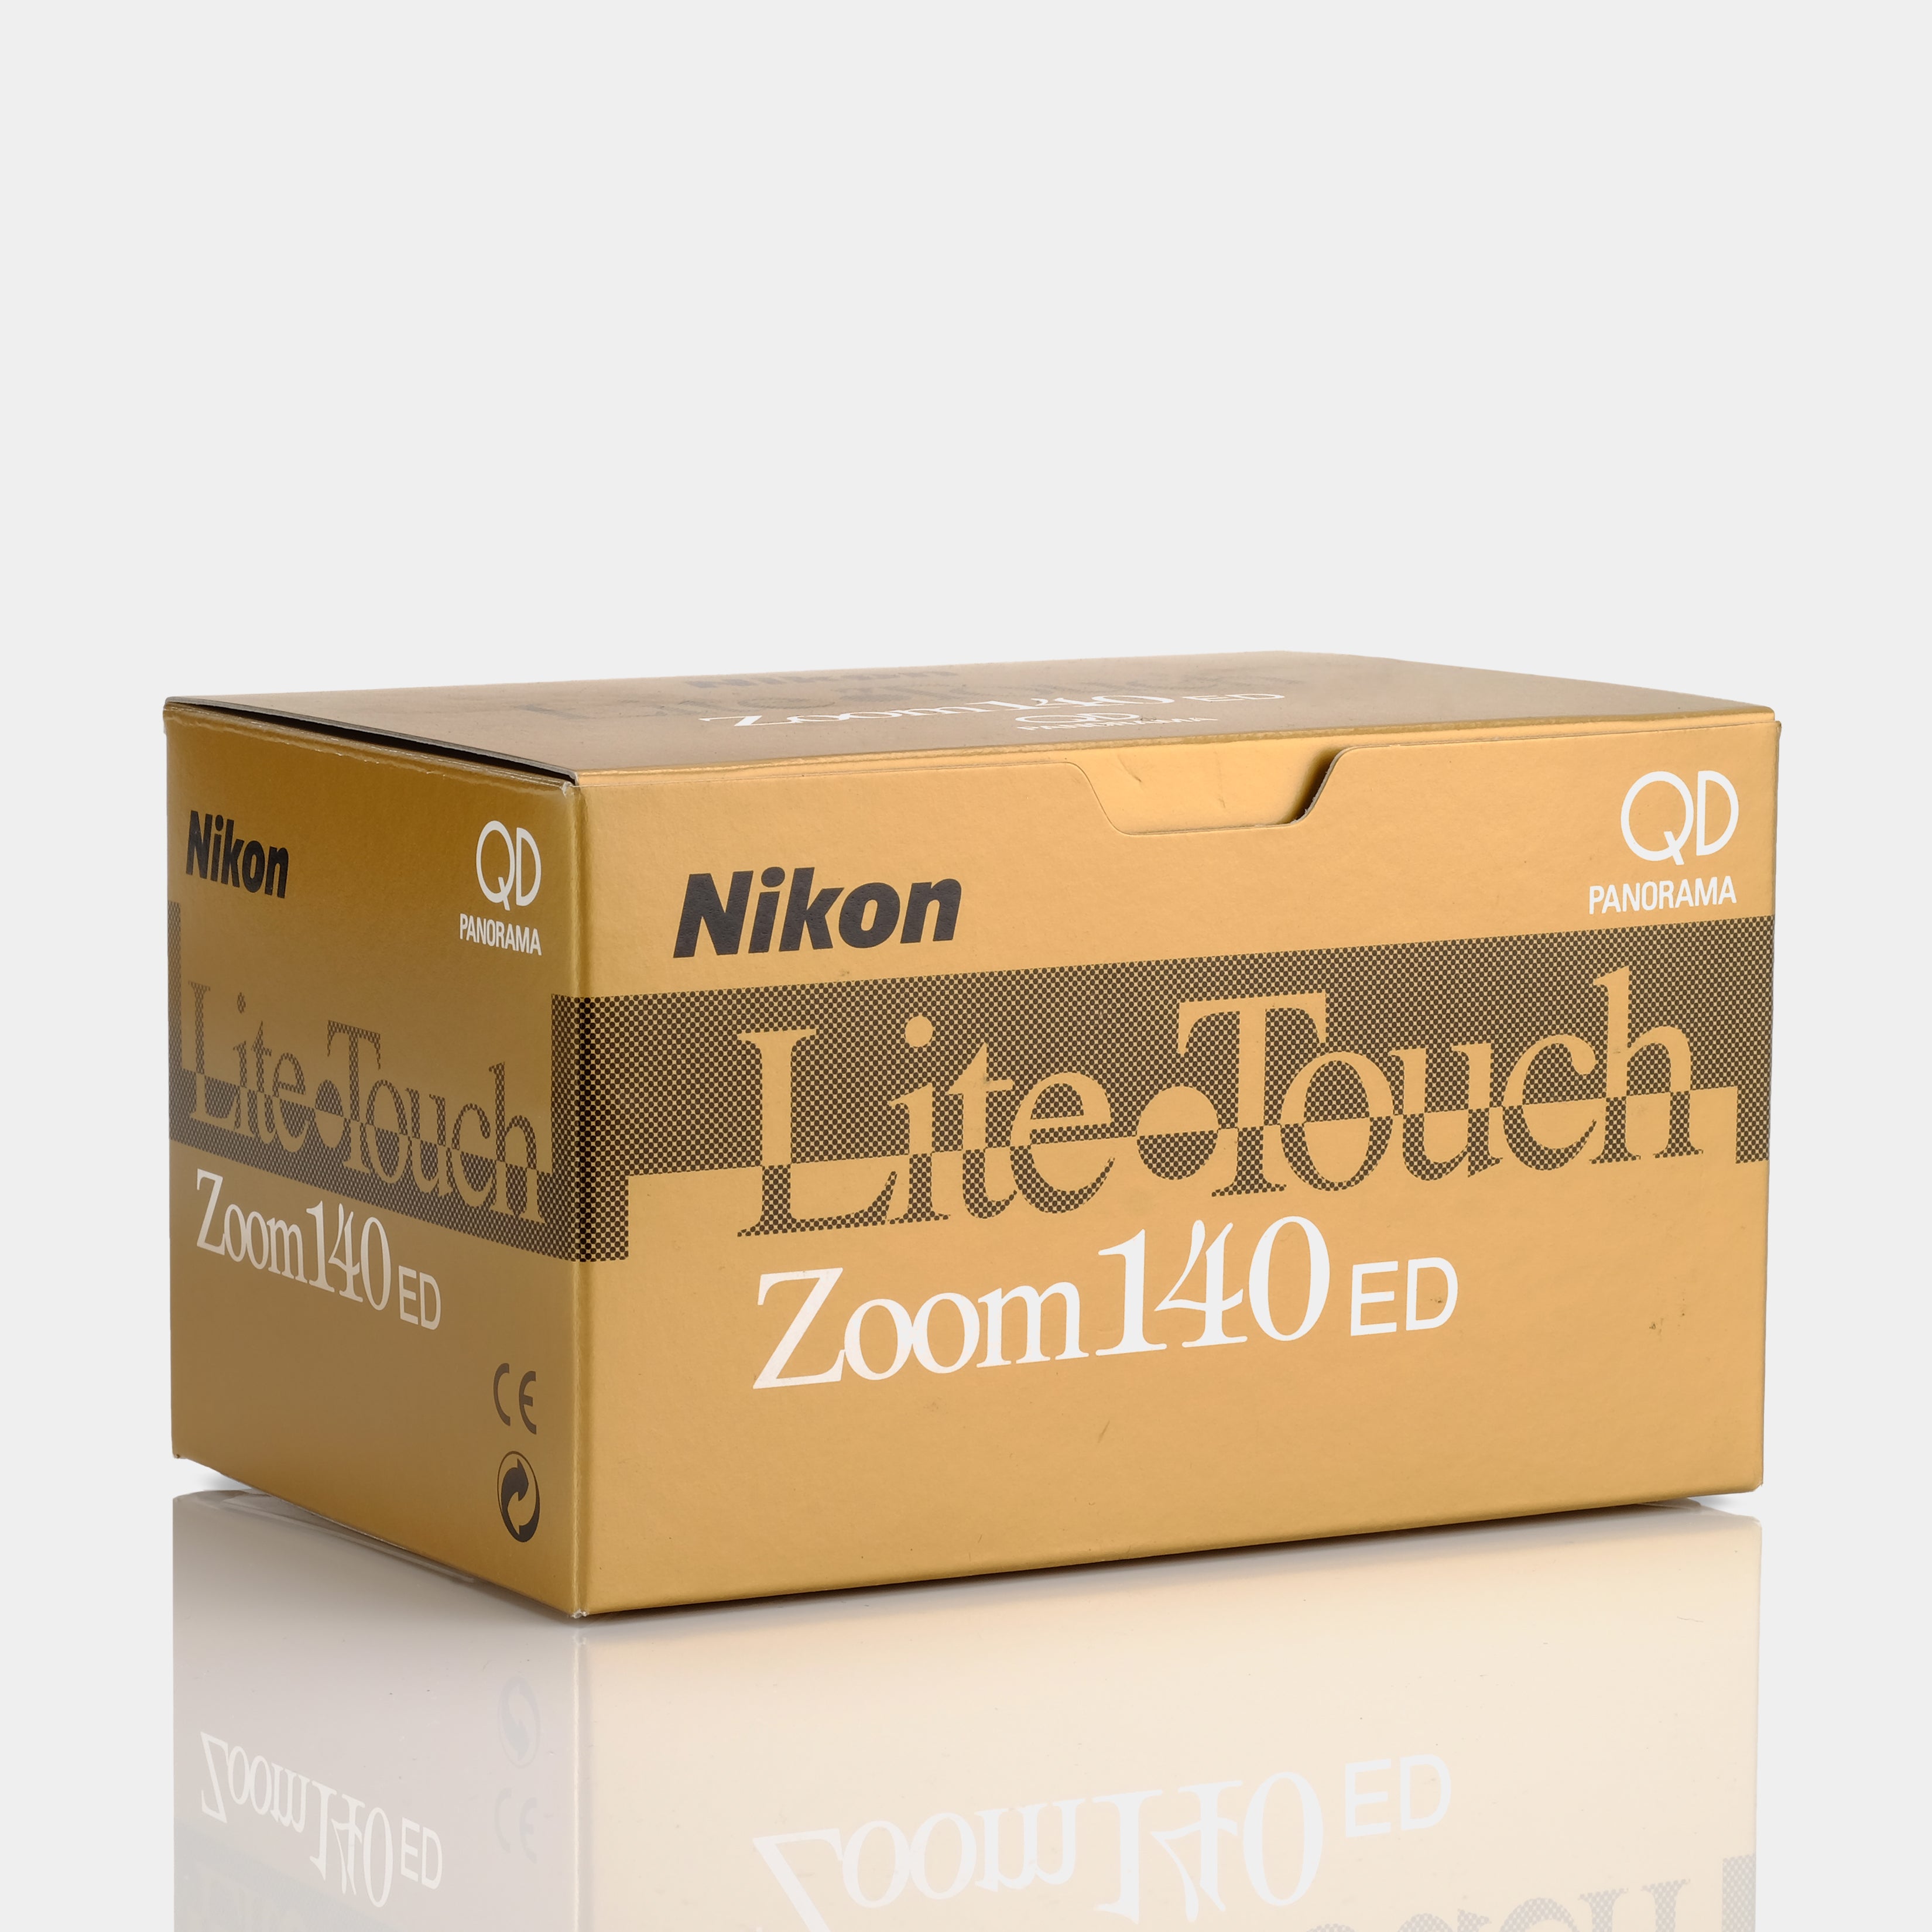 Nikon Lite-Touch Zoom 140 ED 35mm Point And Shoot Film Camera (New Old Stock)